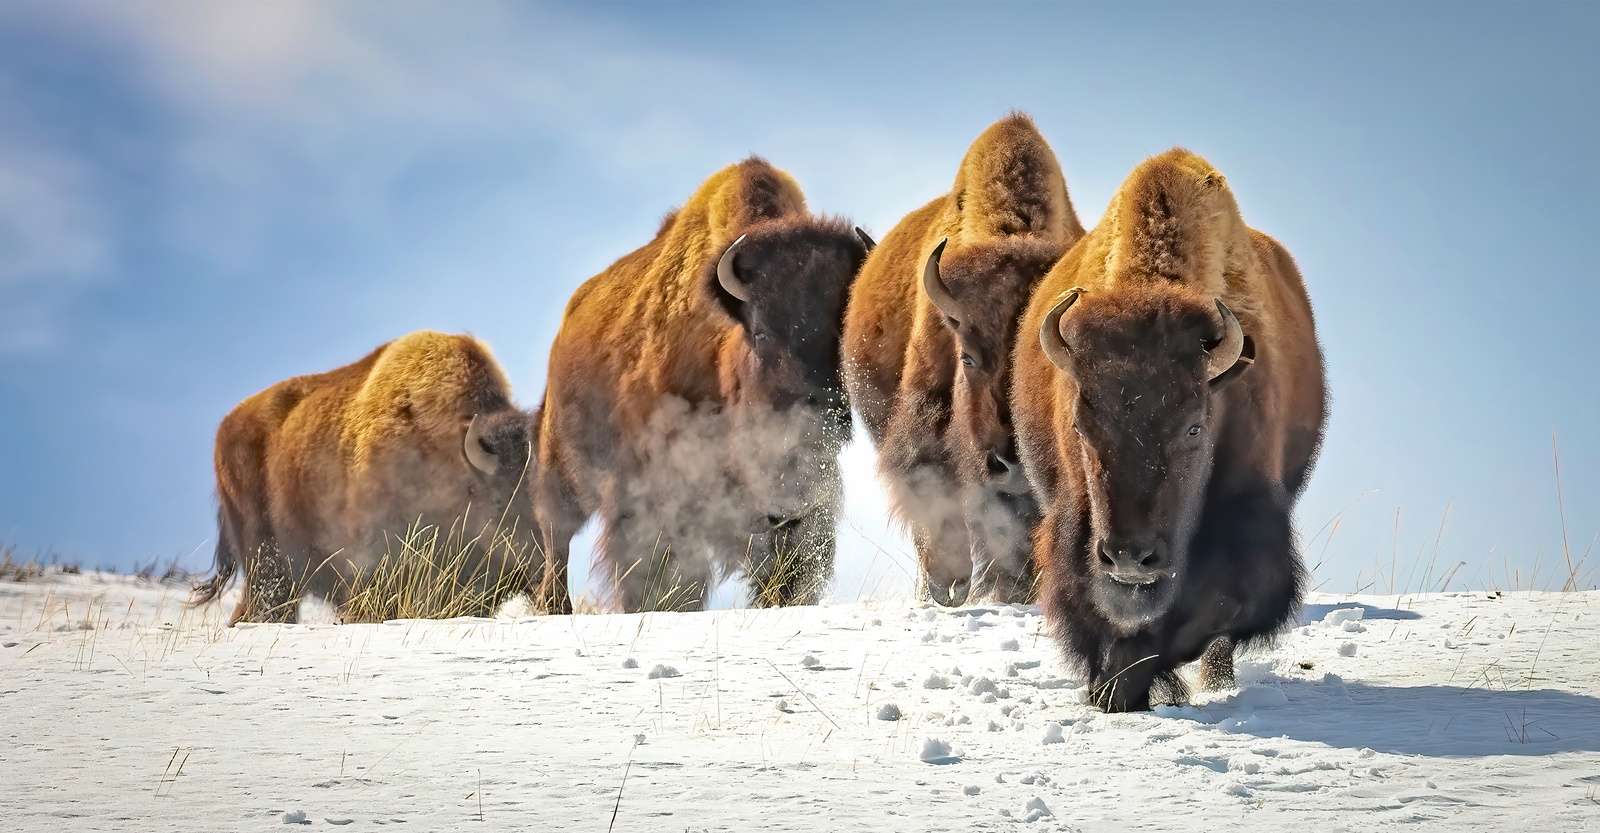 American bison, Yellowstone National Park, Wyoming.